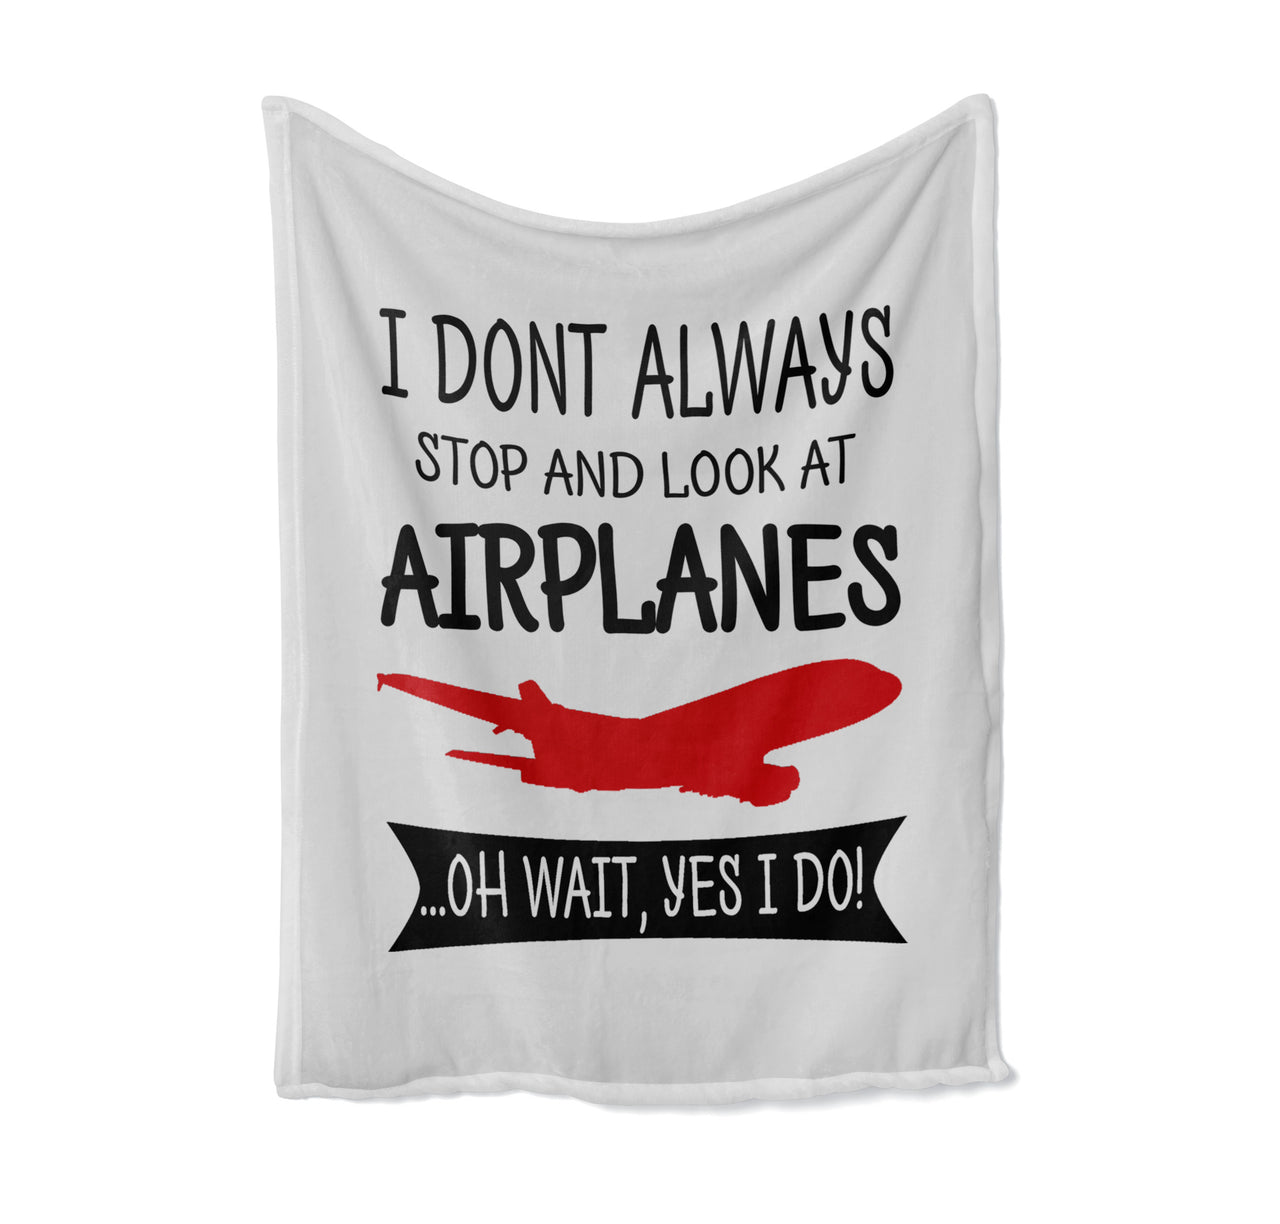 I Don't Always Stop and Look at Airplanes Designed Bed Blankets & Covers